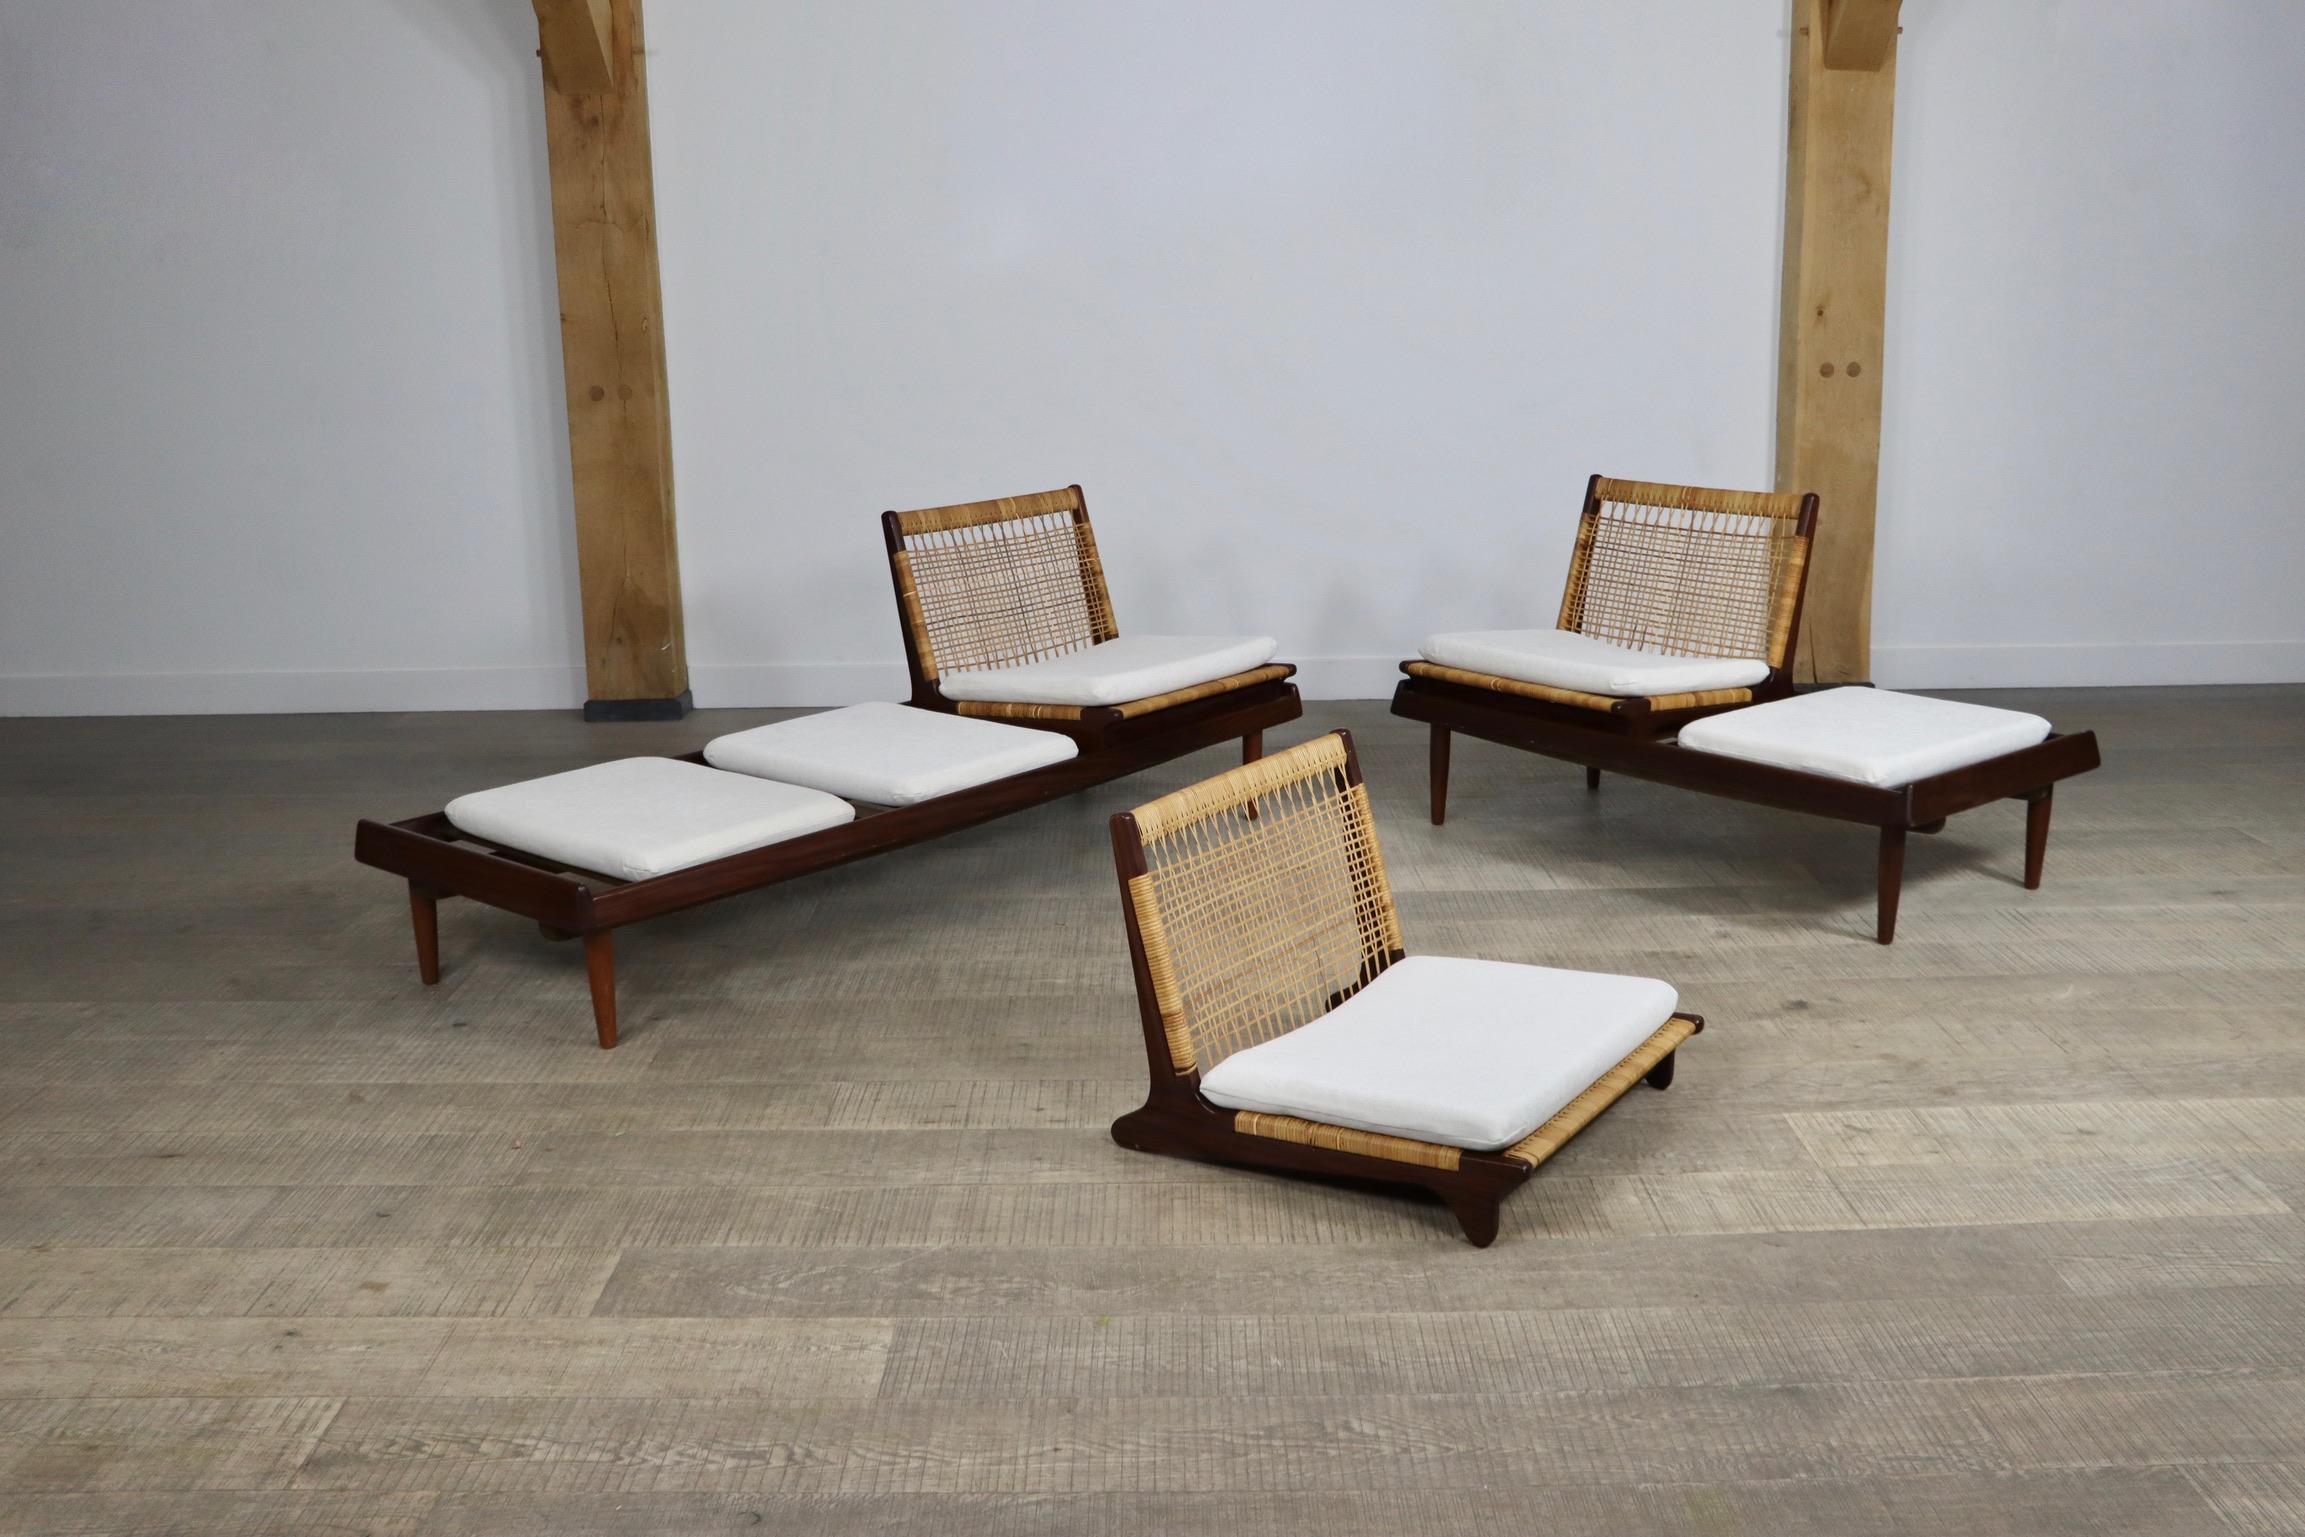 Beautiful seating group model TV161 designed by Hans Olsen, manufactured by Bramin, Denmark 1957. This set is made of solid teak, with very nice cane work and cream linen upholstered cushions. This modular set is multi functional, as it could be